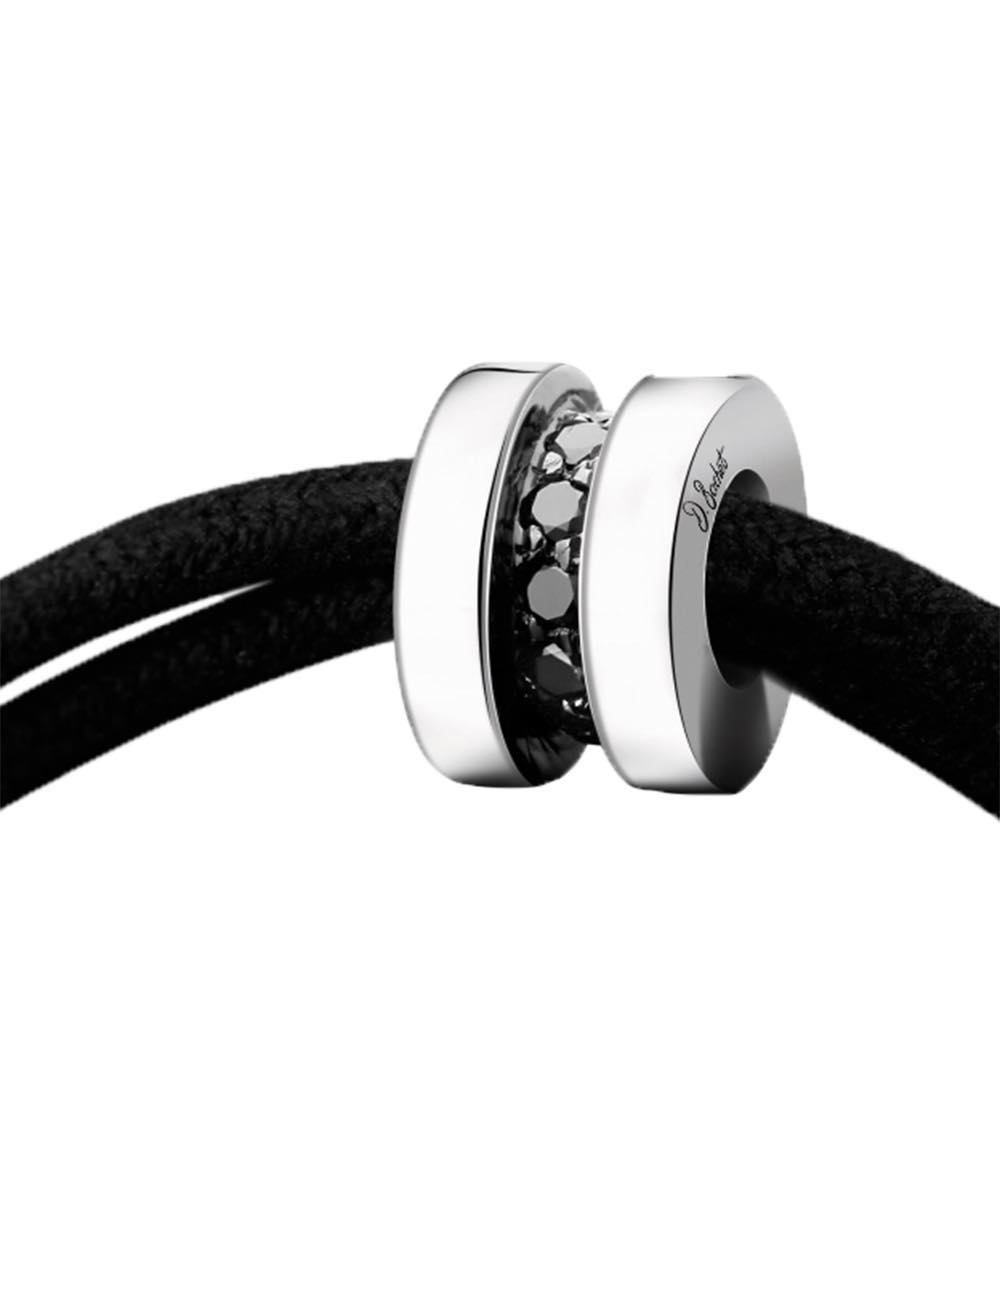 Men's bracelet for you or to offer in 18 carat gold and black diamonds on an adjustable black cord